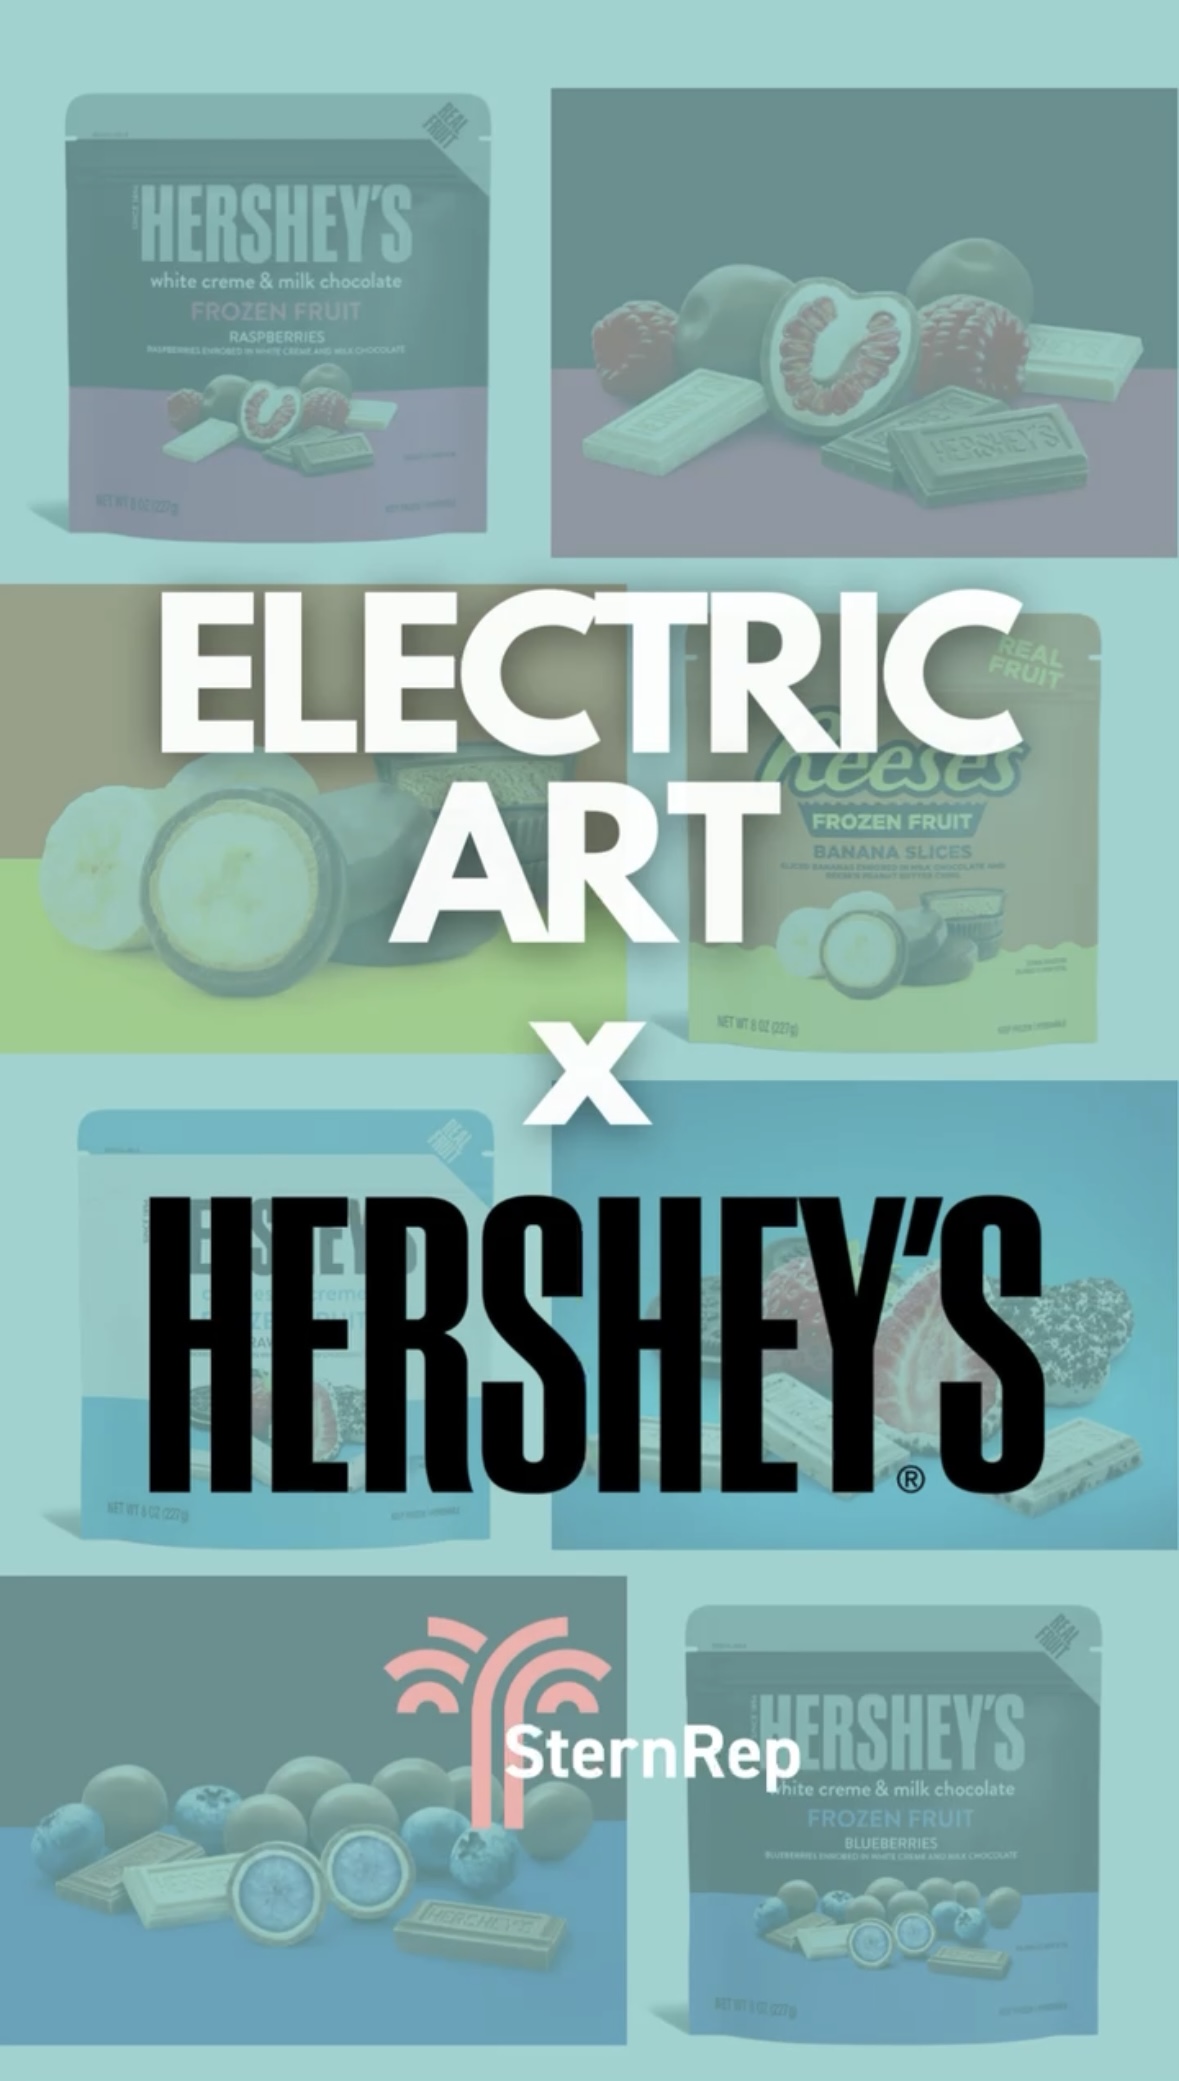 electric art cgi creates new cover image for hershey's chocolate